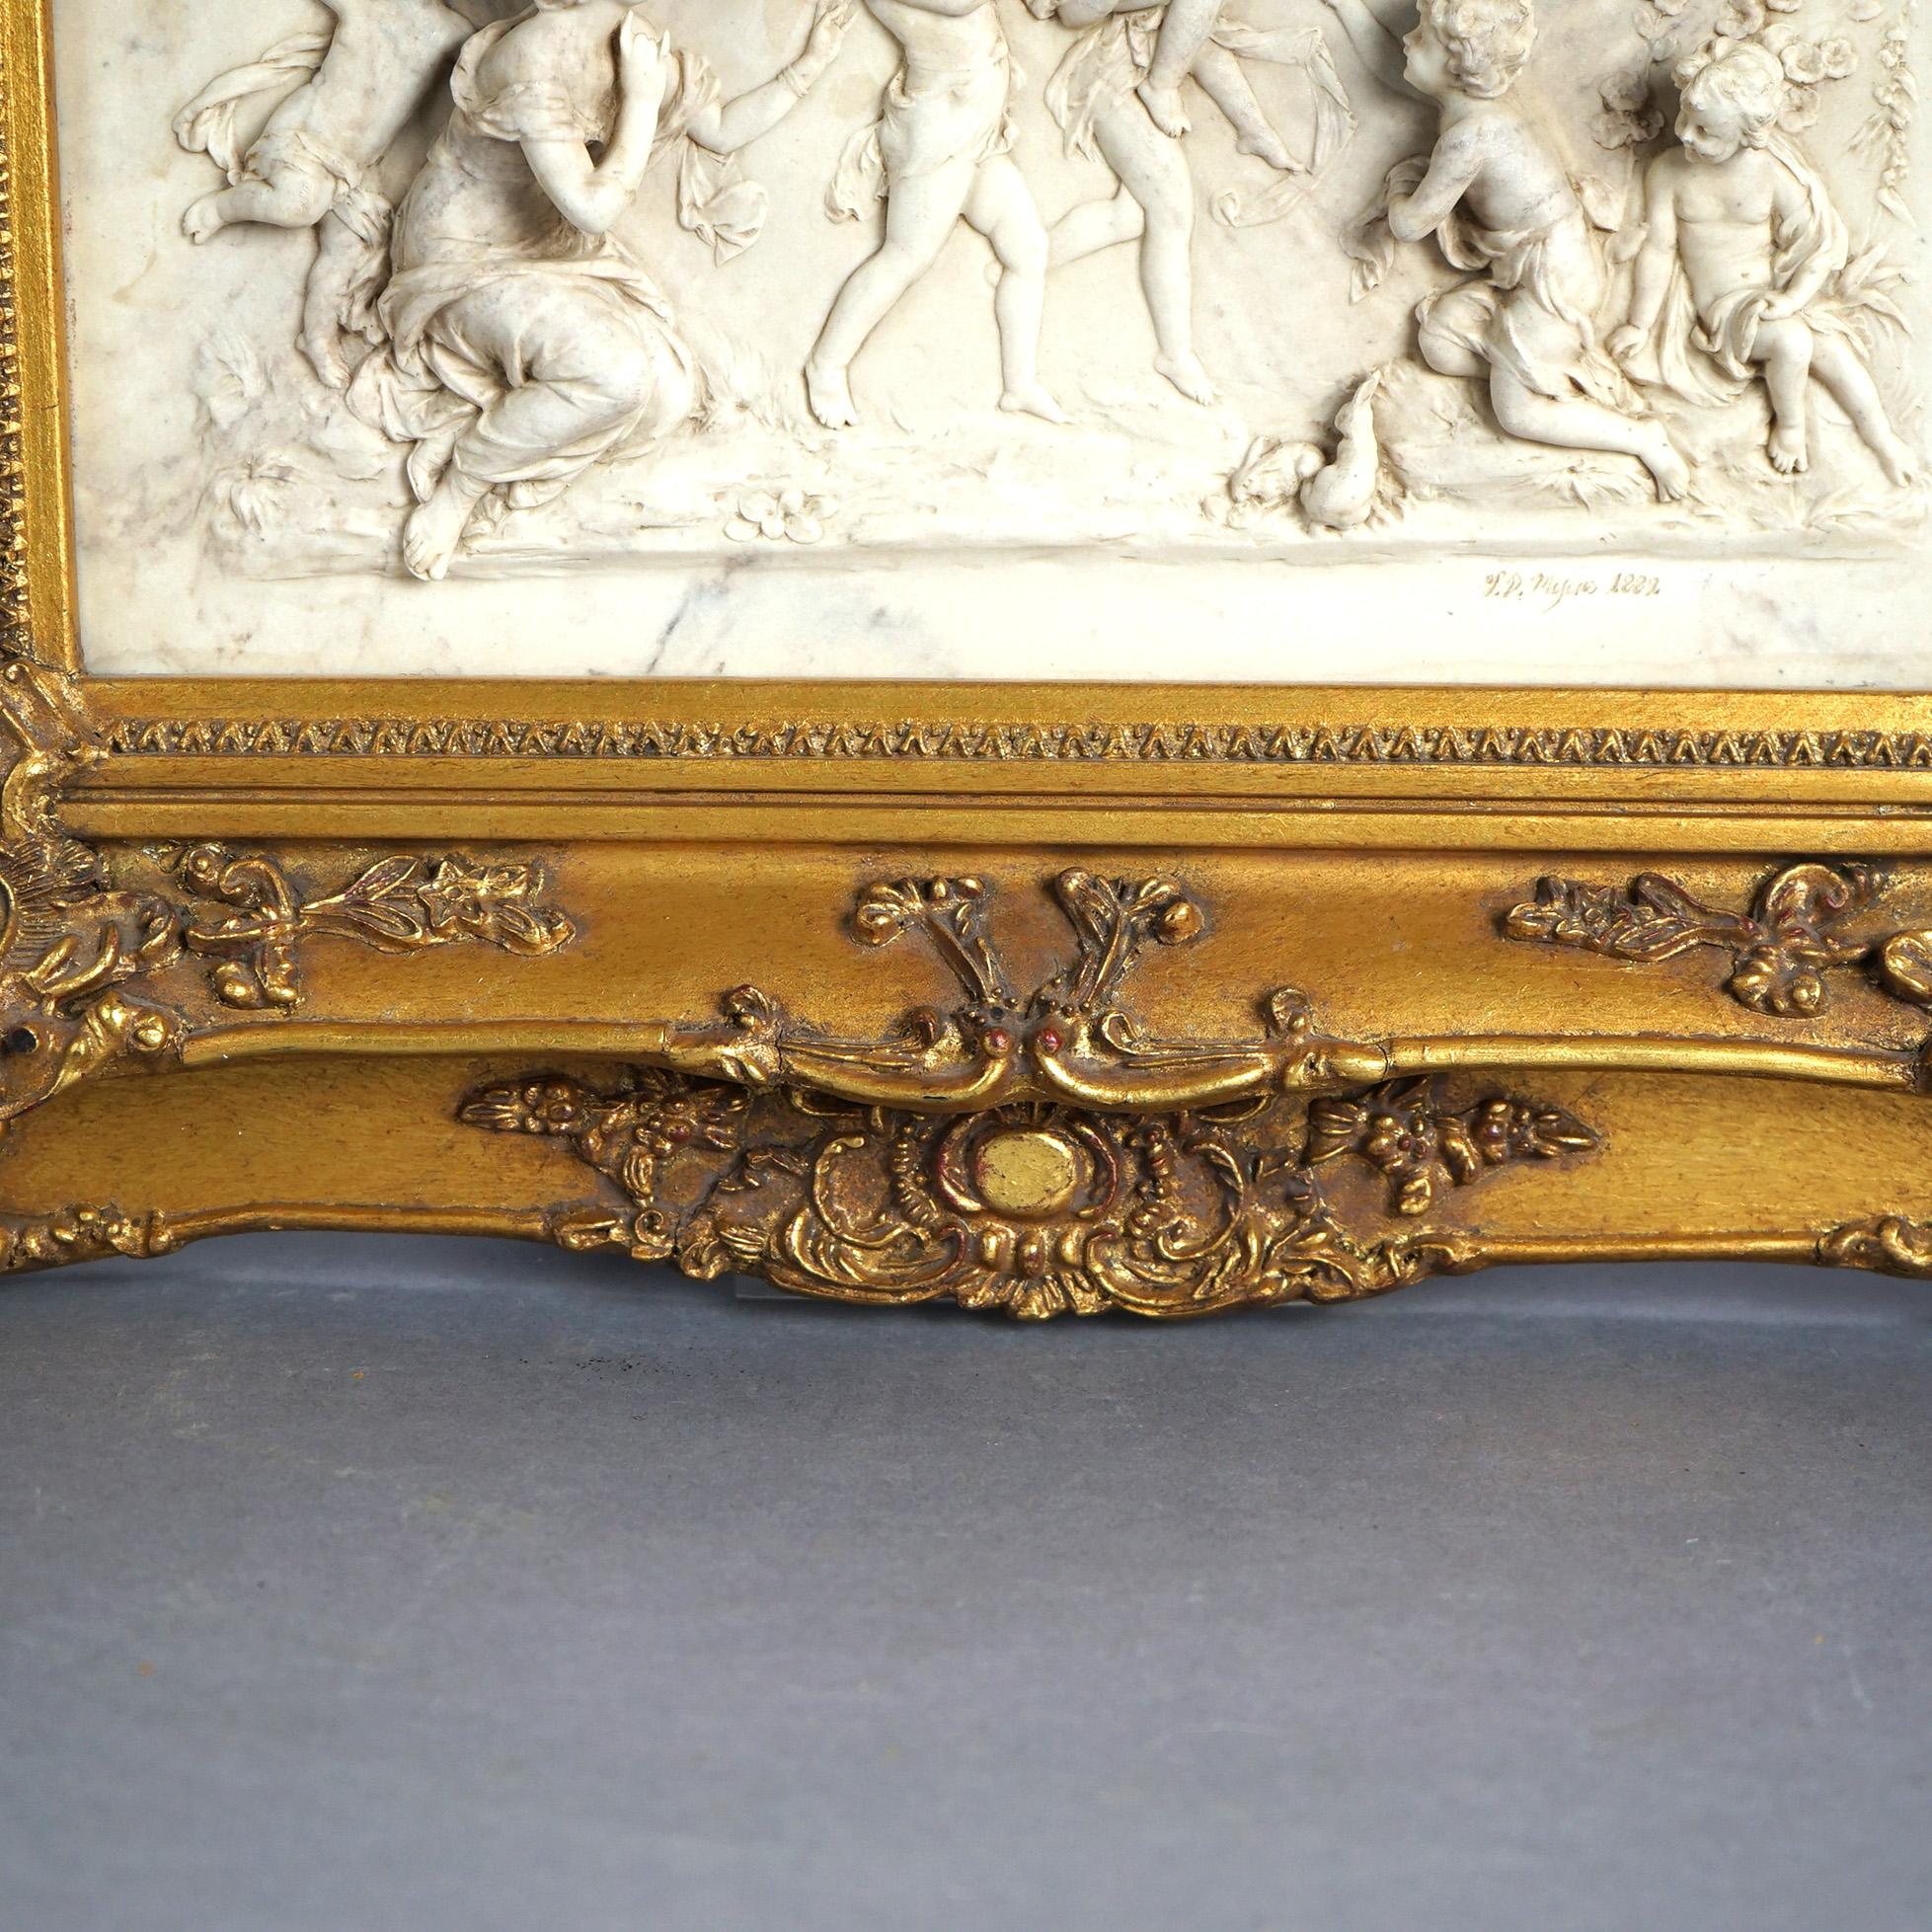 Antiquity Classical Carved Marble Plaque with Figures In High Relief Signed 19th C Bon état - En vente à Big Flats, NY